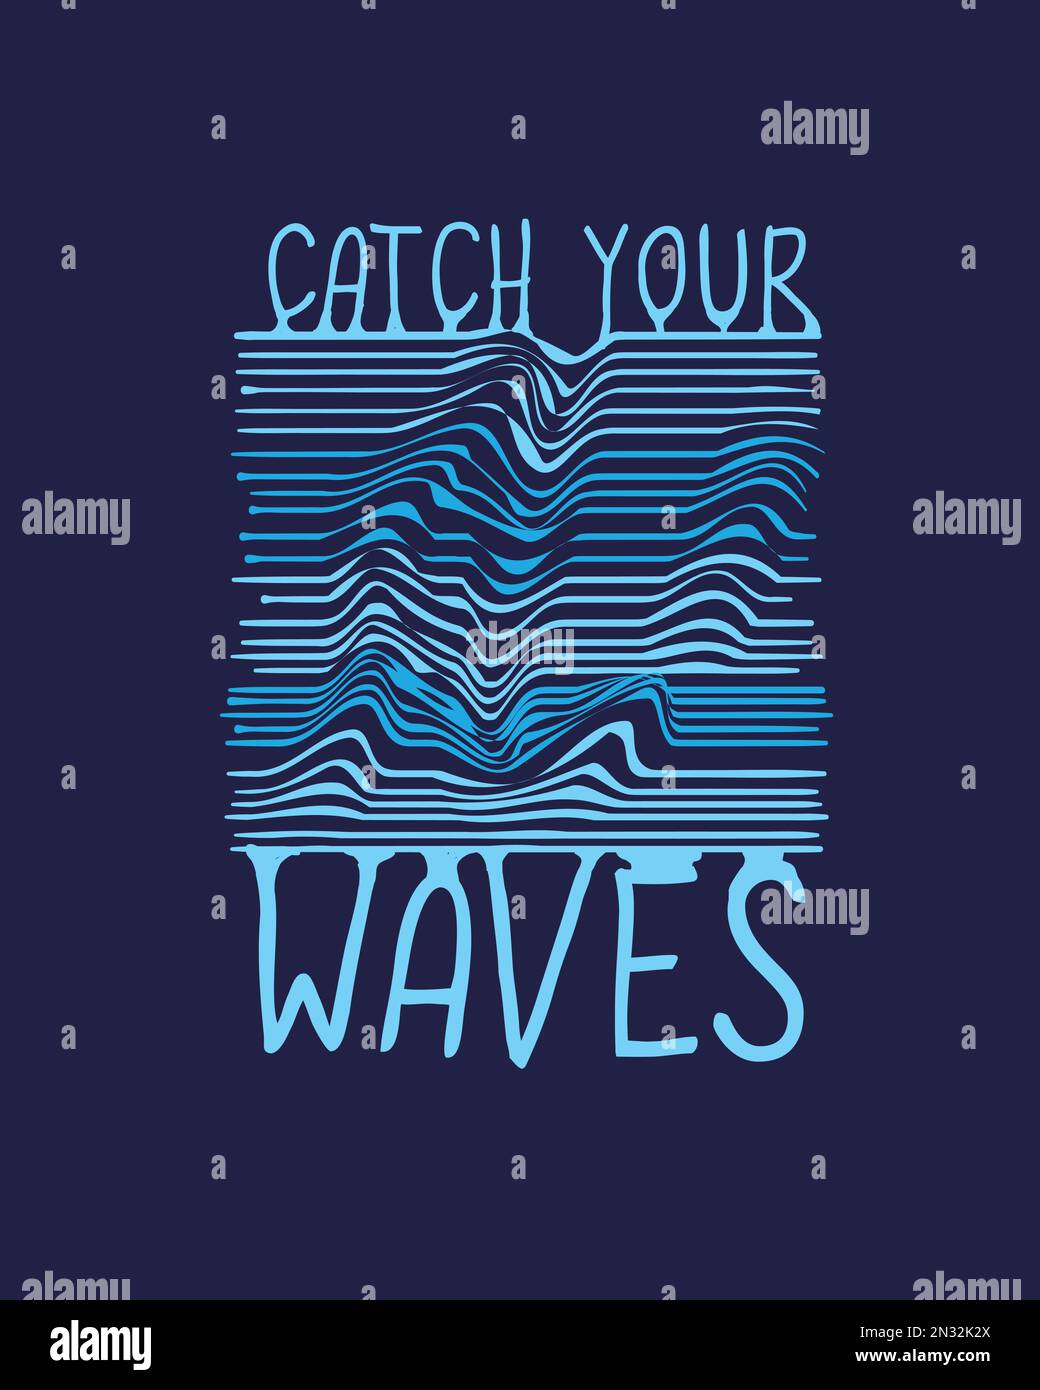 Catch your waves Typography waves line art drawing graphic design poster for sticker,banner, label, logo, t shirt print vector Stock Vector